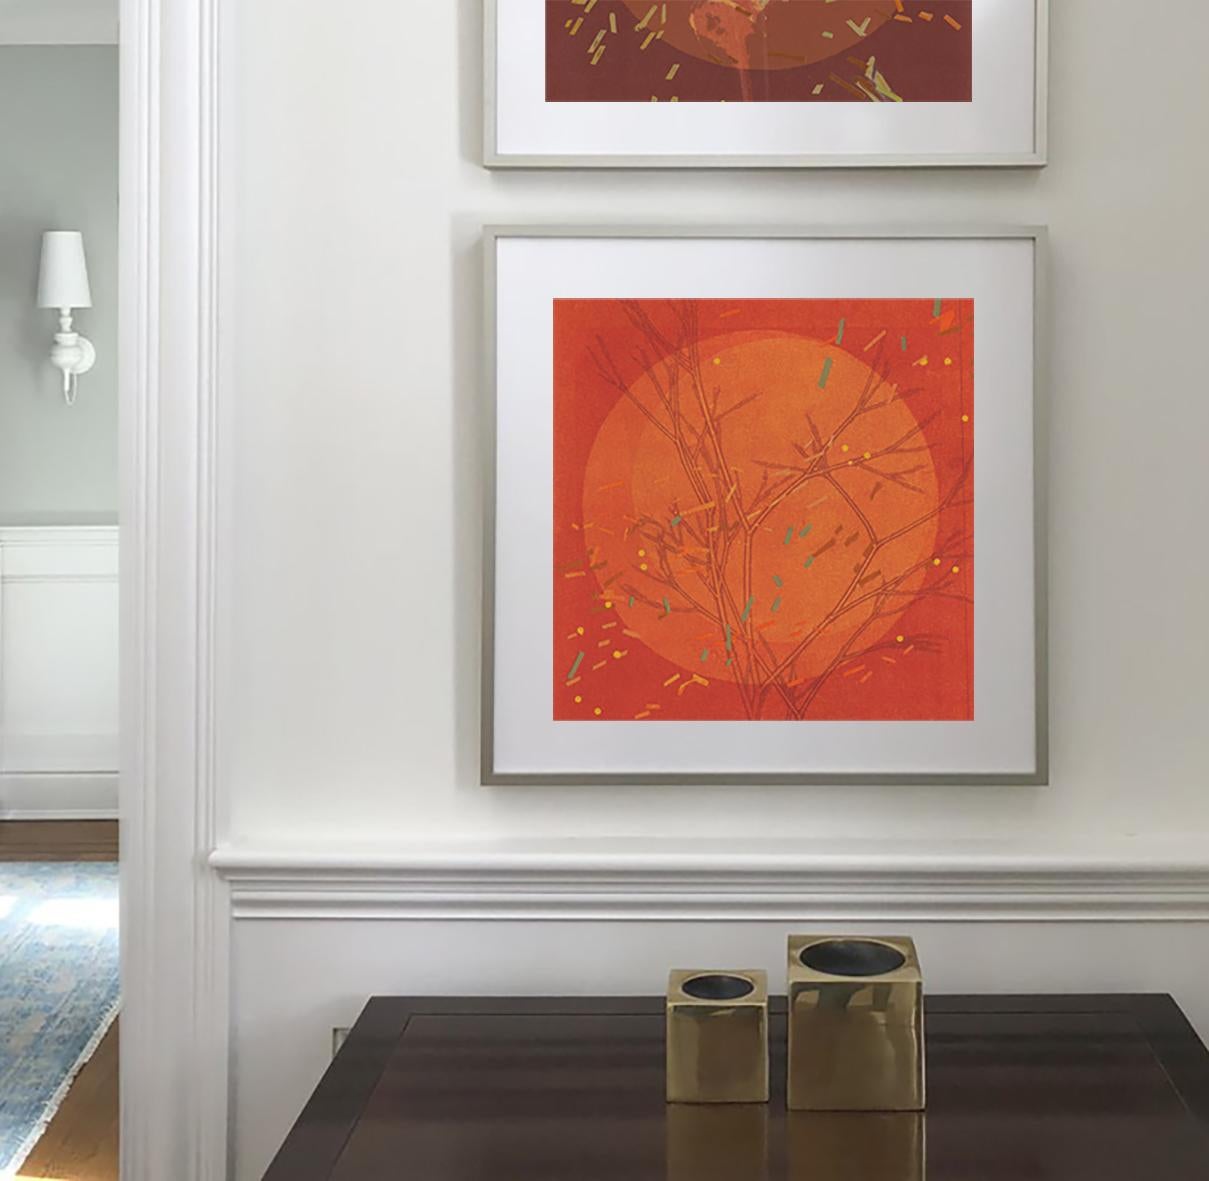 Autumn Equinox III: abstract monotype print & painting on paper in orange & red - Painting by Agathe Bouton & Deirdre Murphy